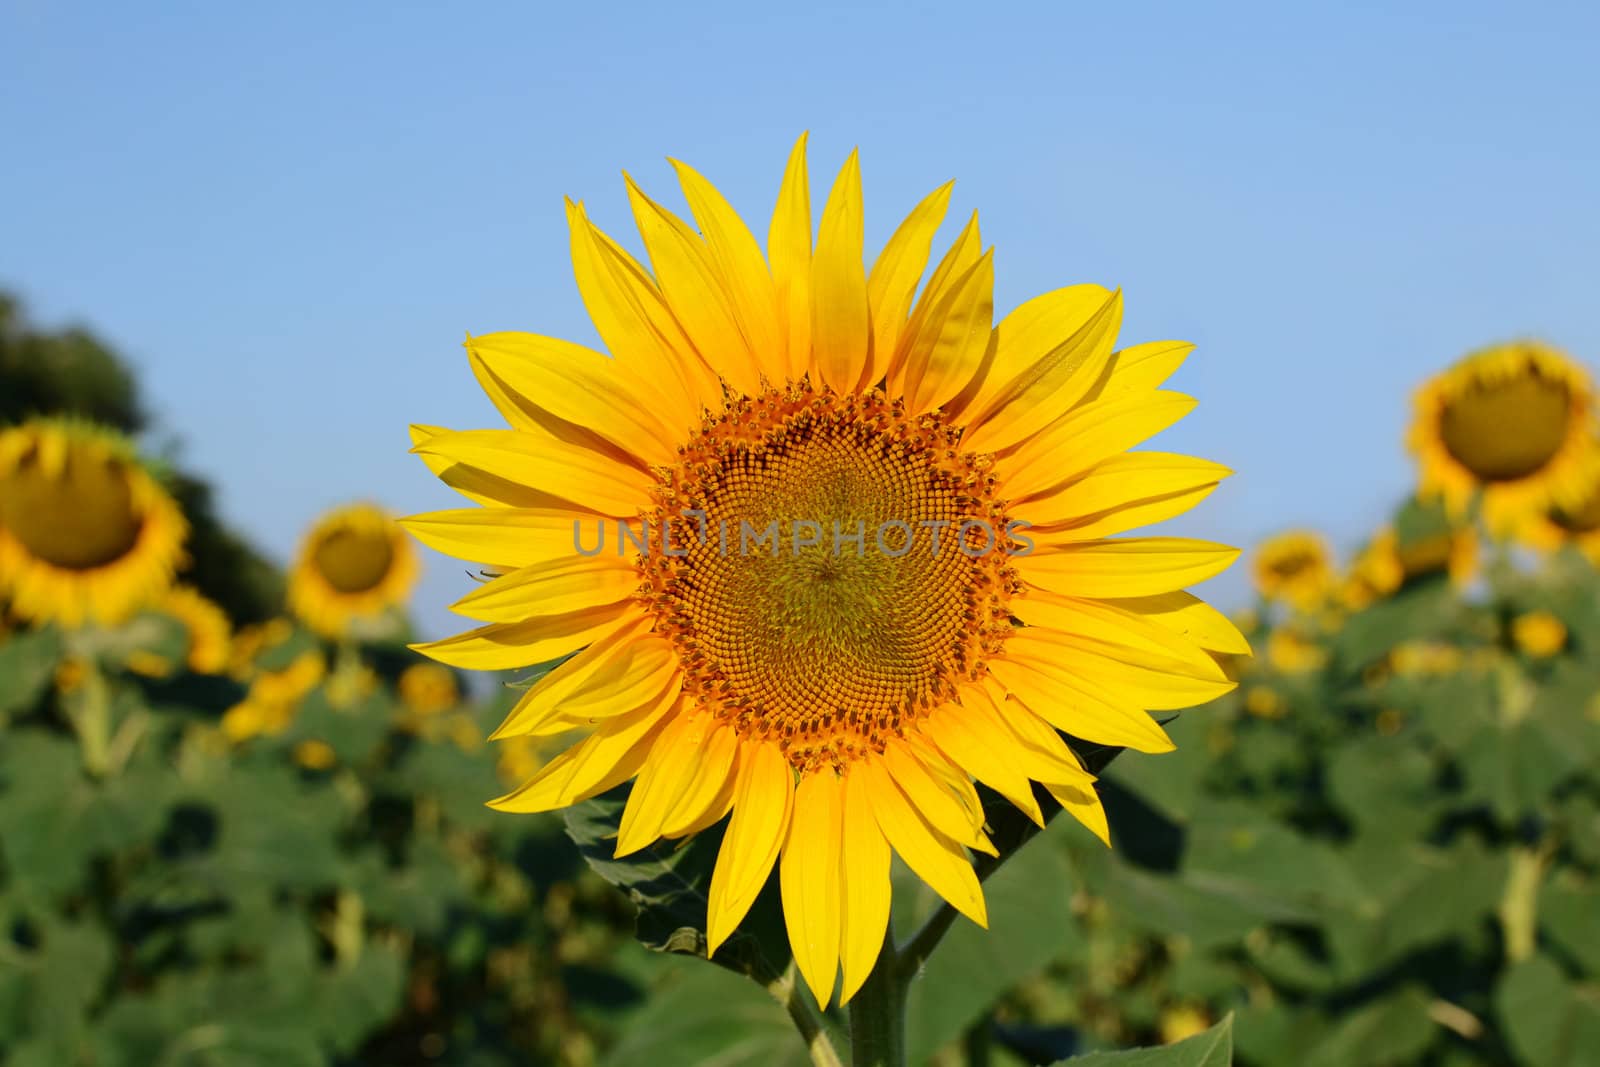 sunflowers at the field in summer 